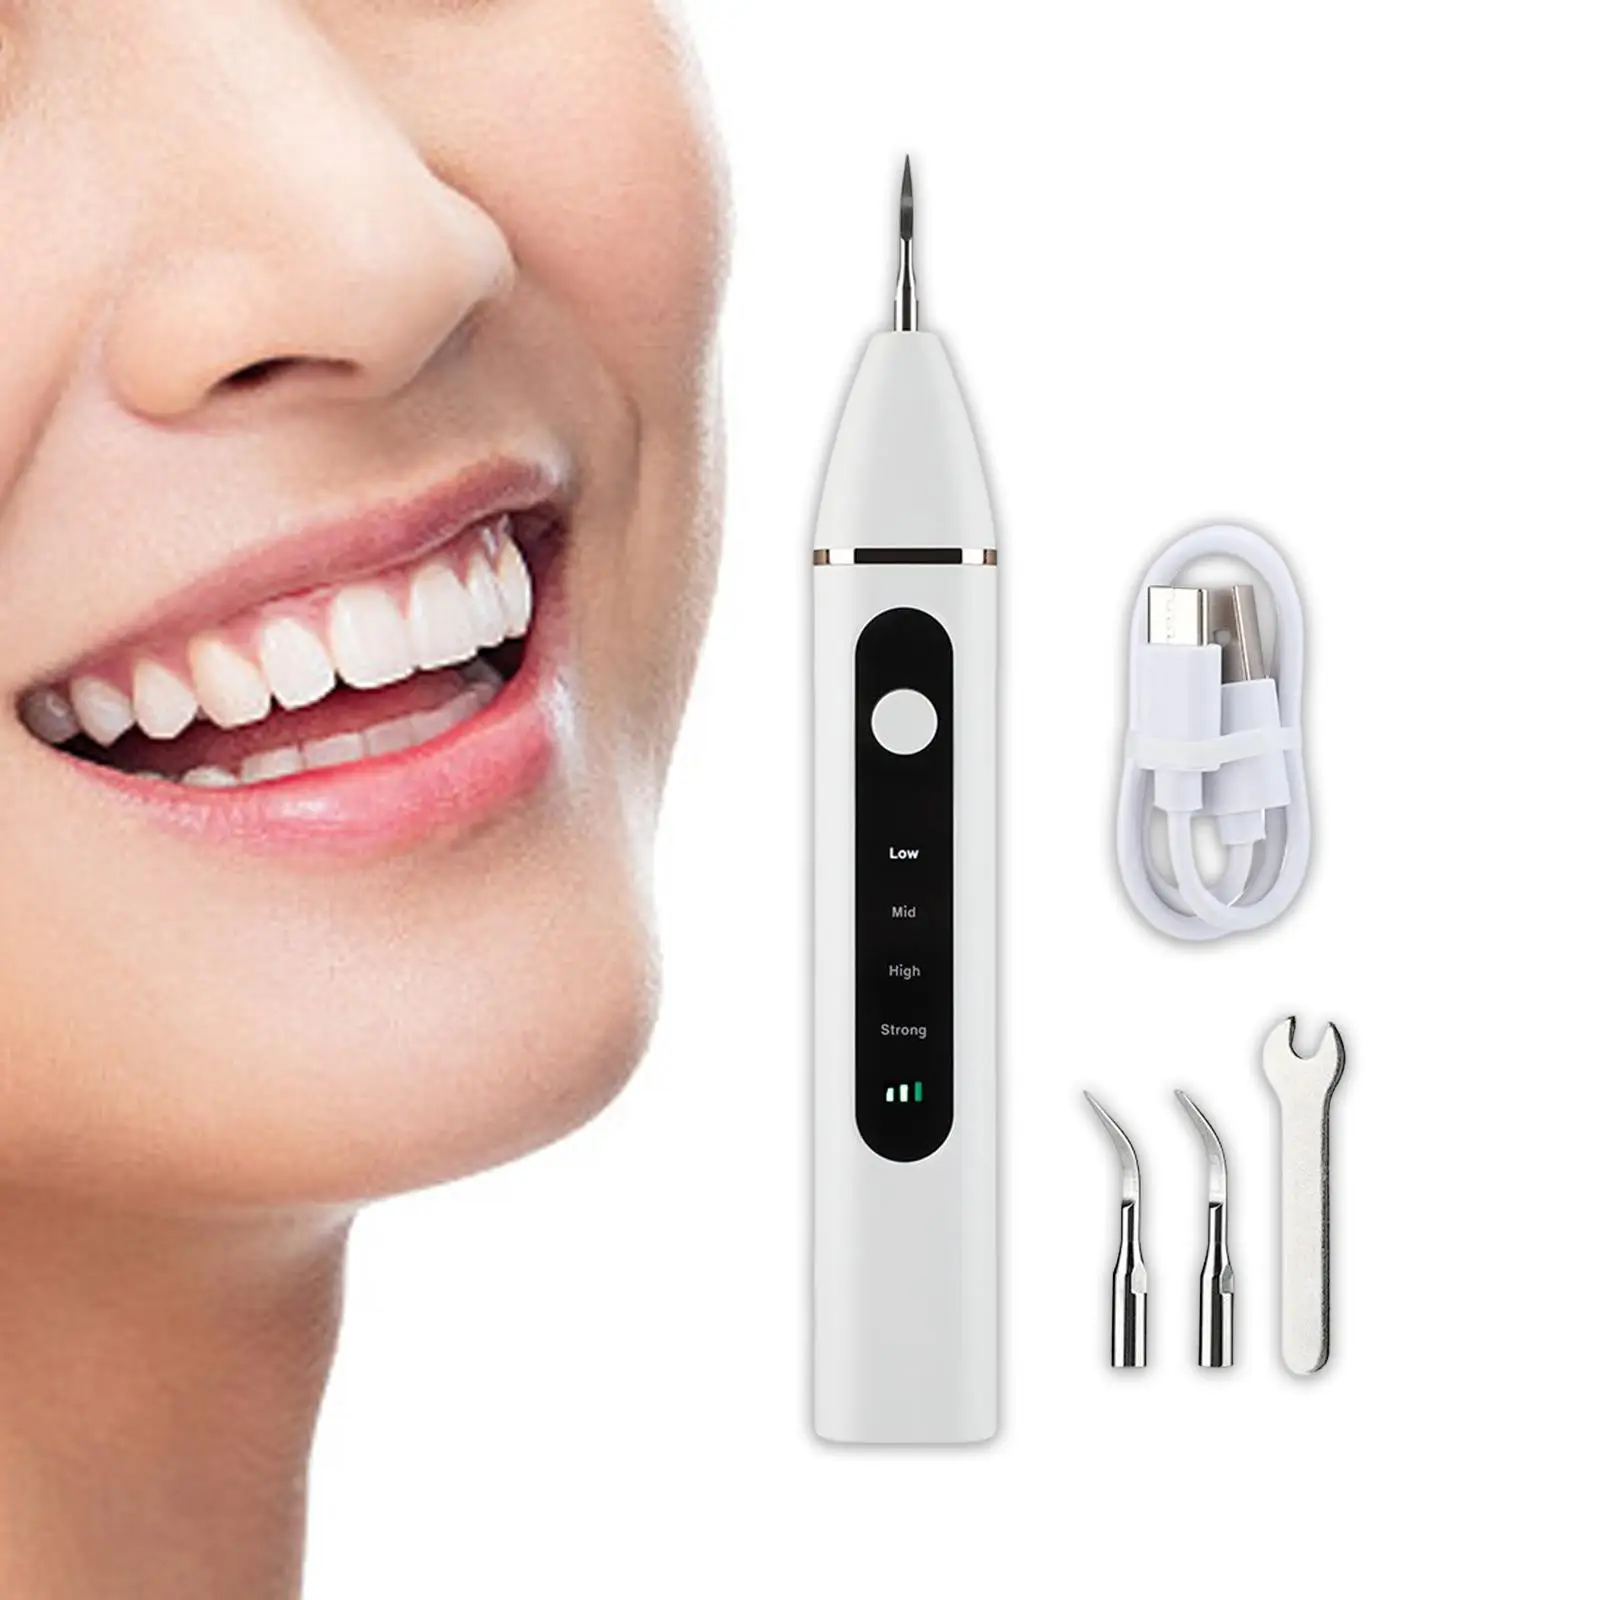 Cordless teeths Cleaner Visual Rechargeable Irrigator teeths 4 intensities teeths Cleaning Toothbrush for Home Travel